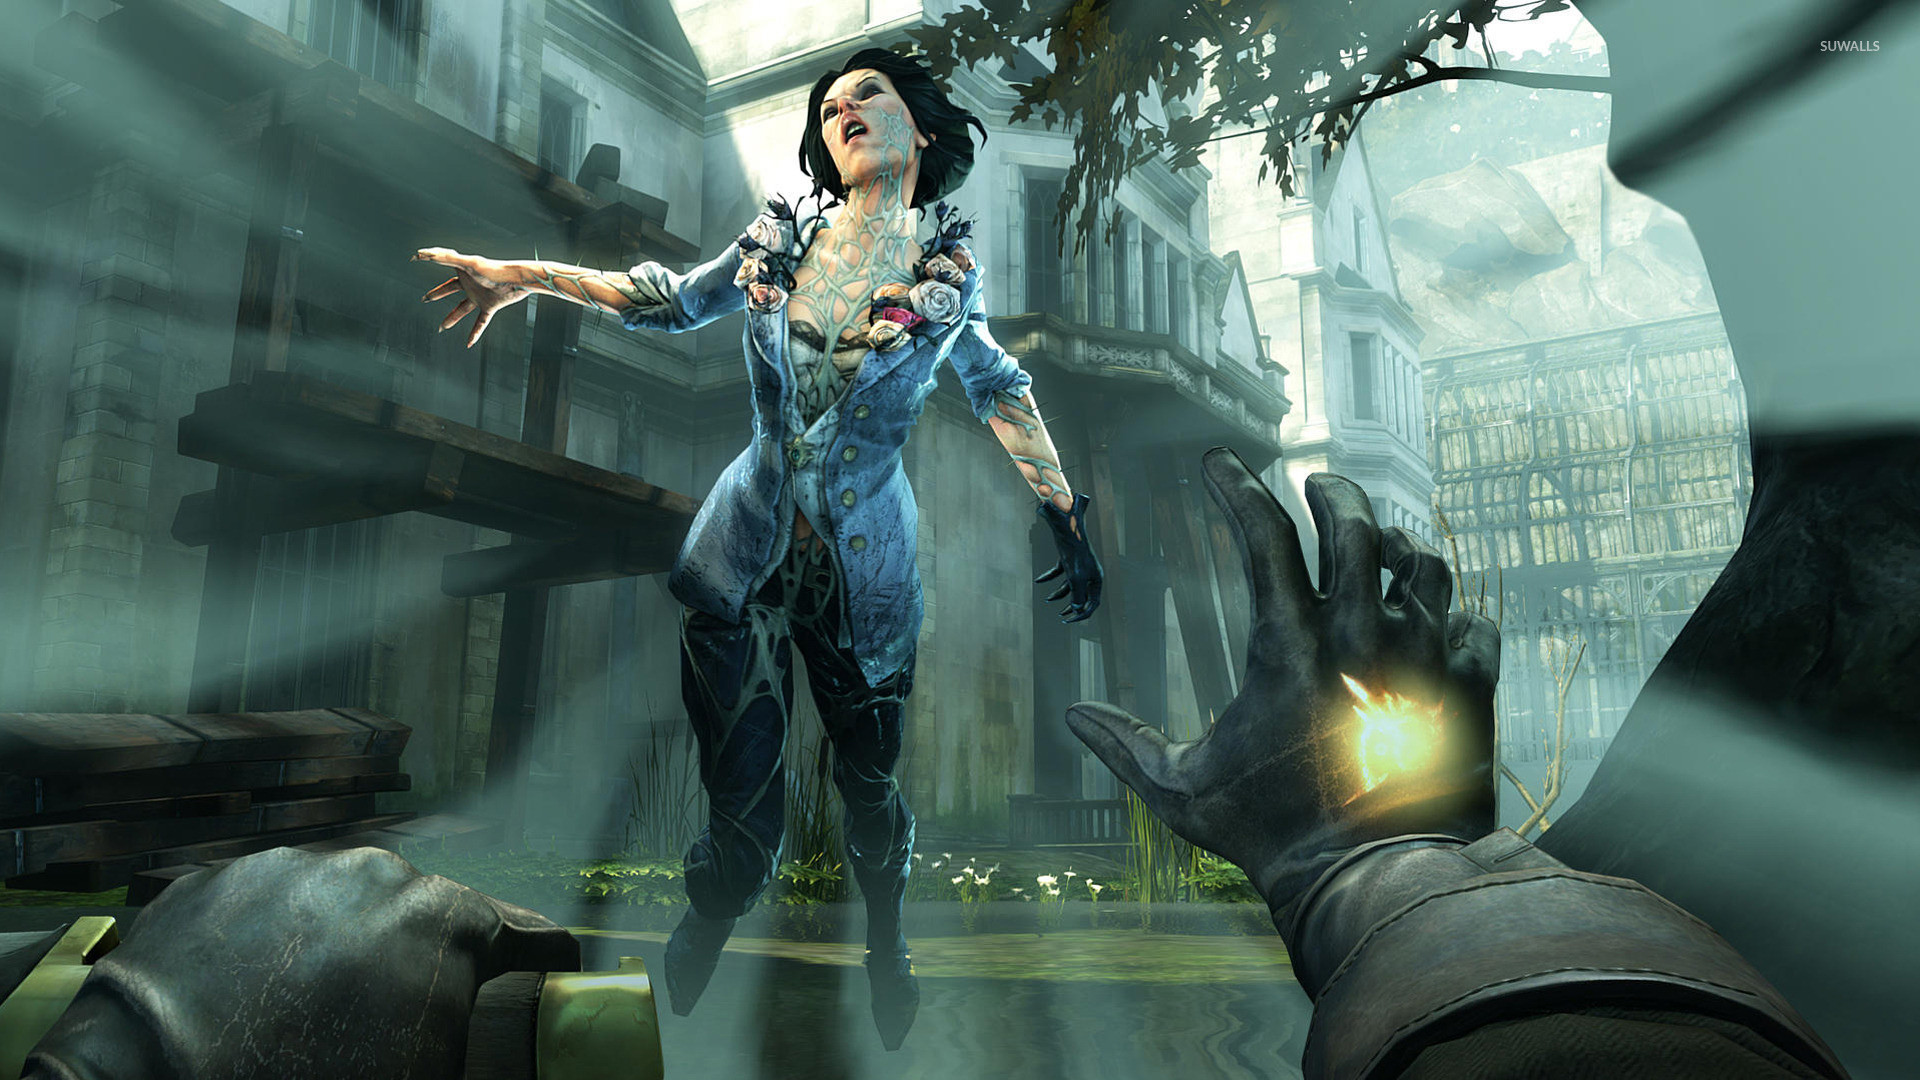 1920x1080 Dishonored: The Brigmore Witches [4] wallpaper